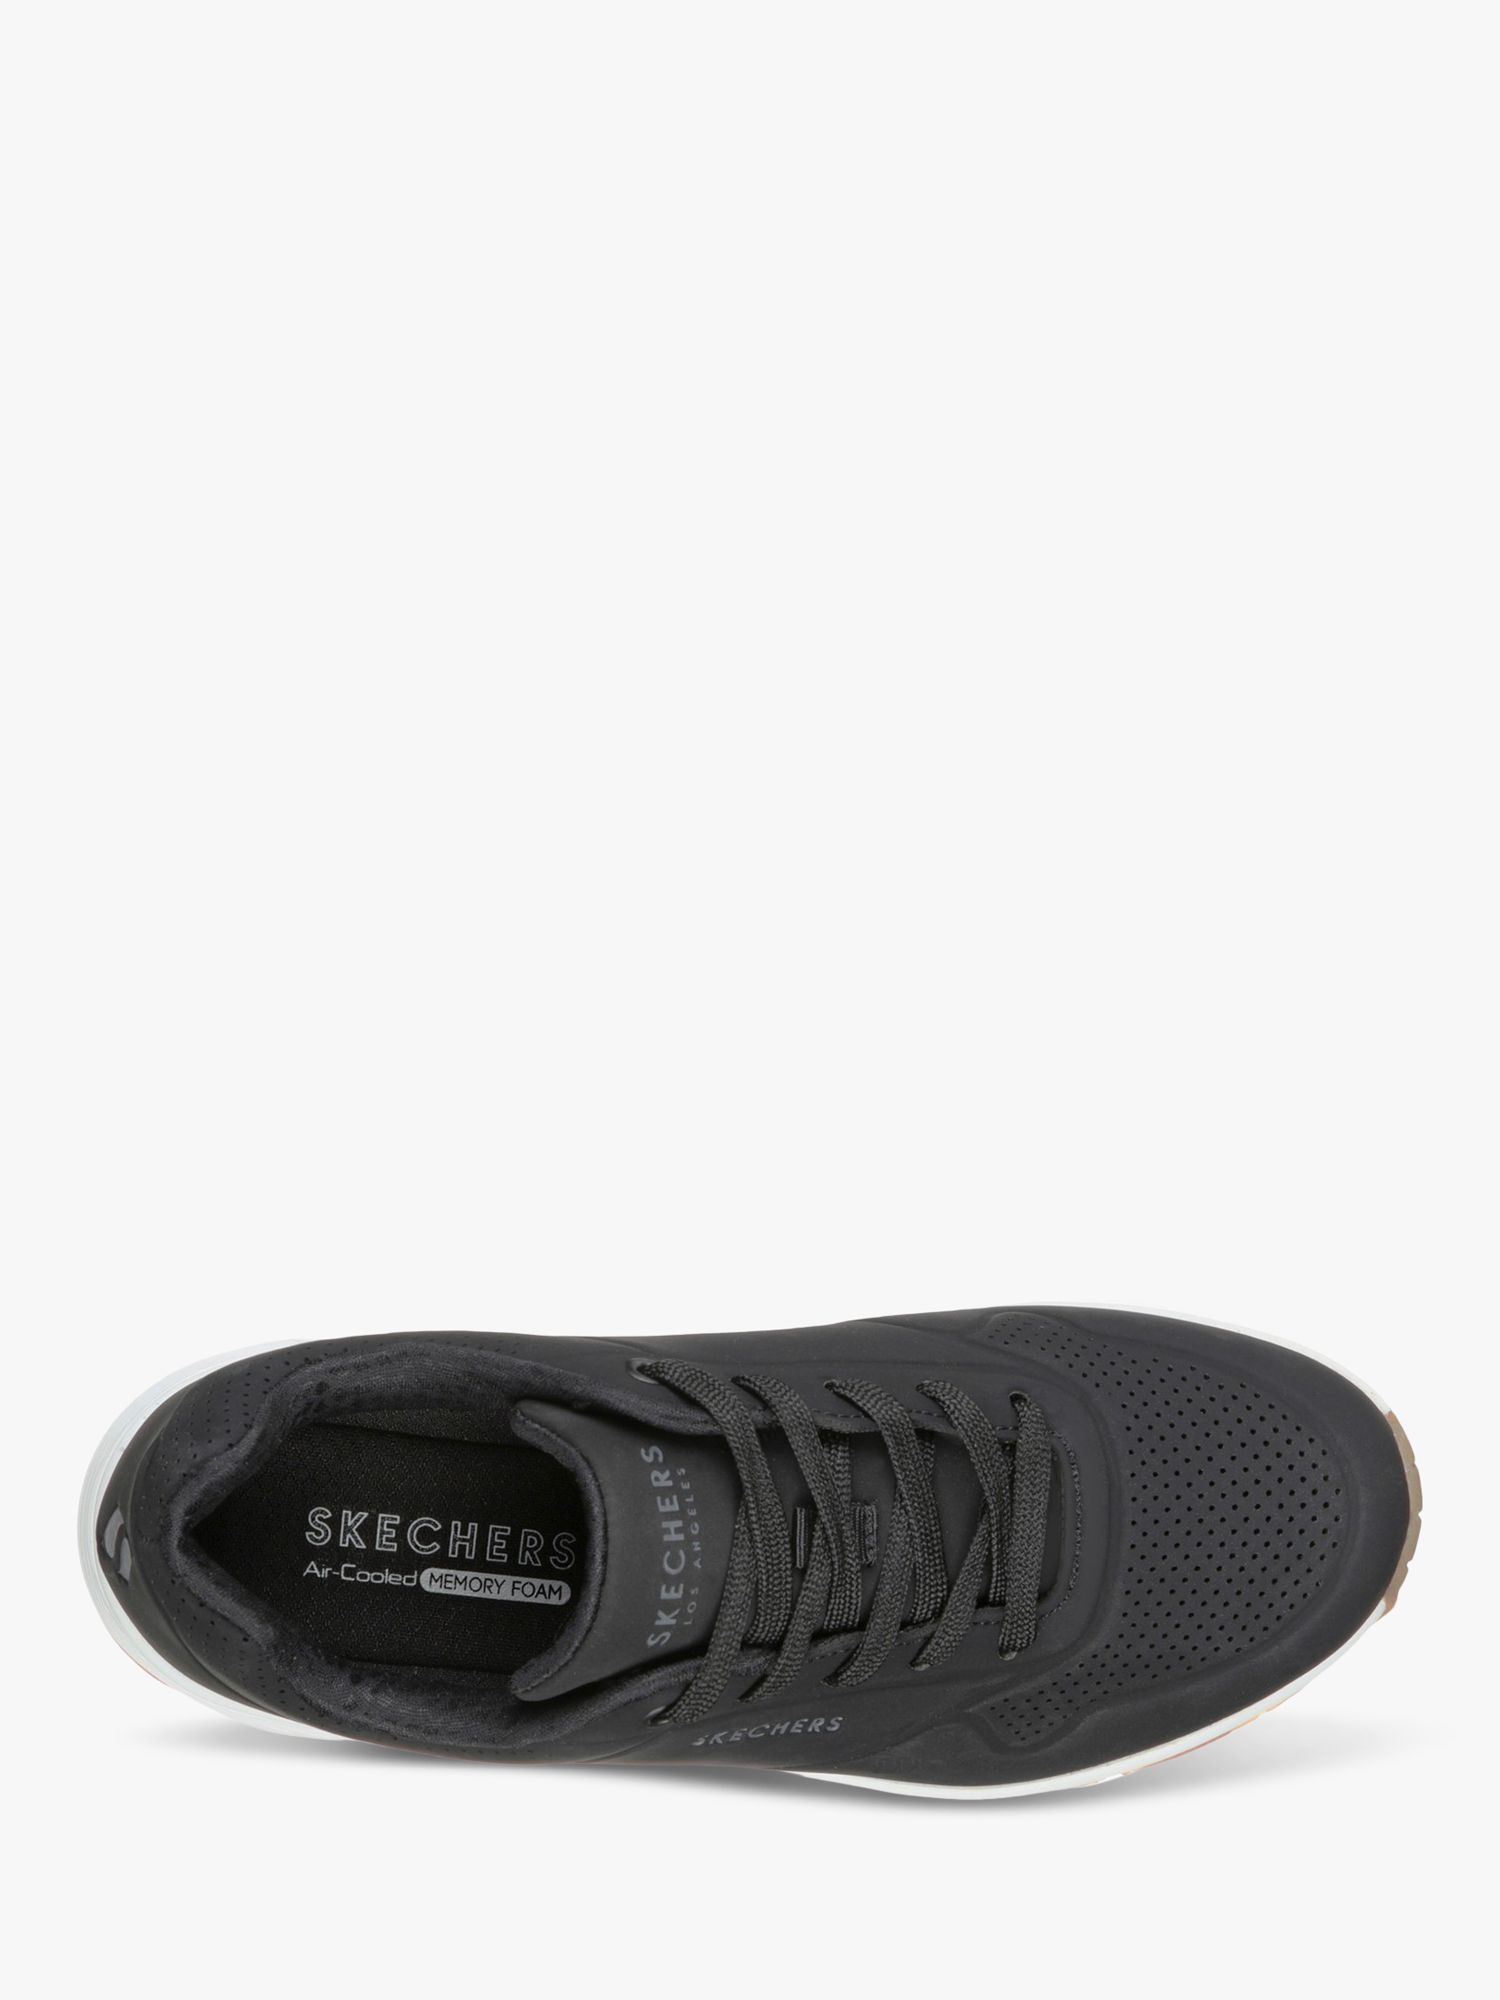 Buy Skechers Uno Stand On Air Sports Trainers Online at johnlewis.com